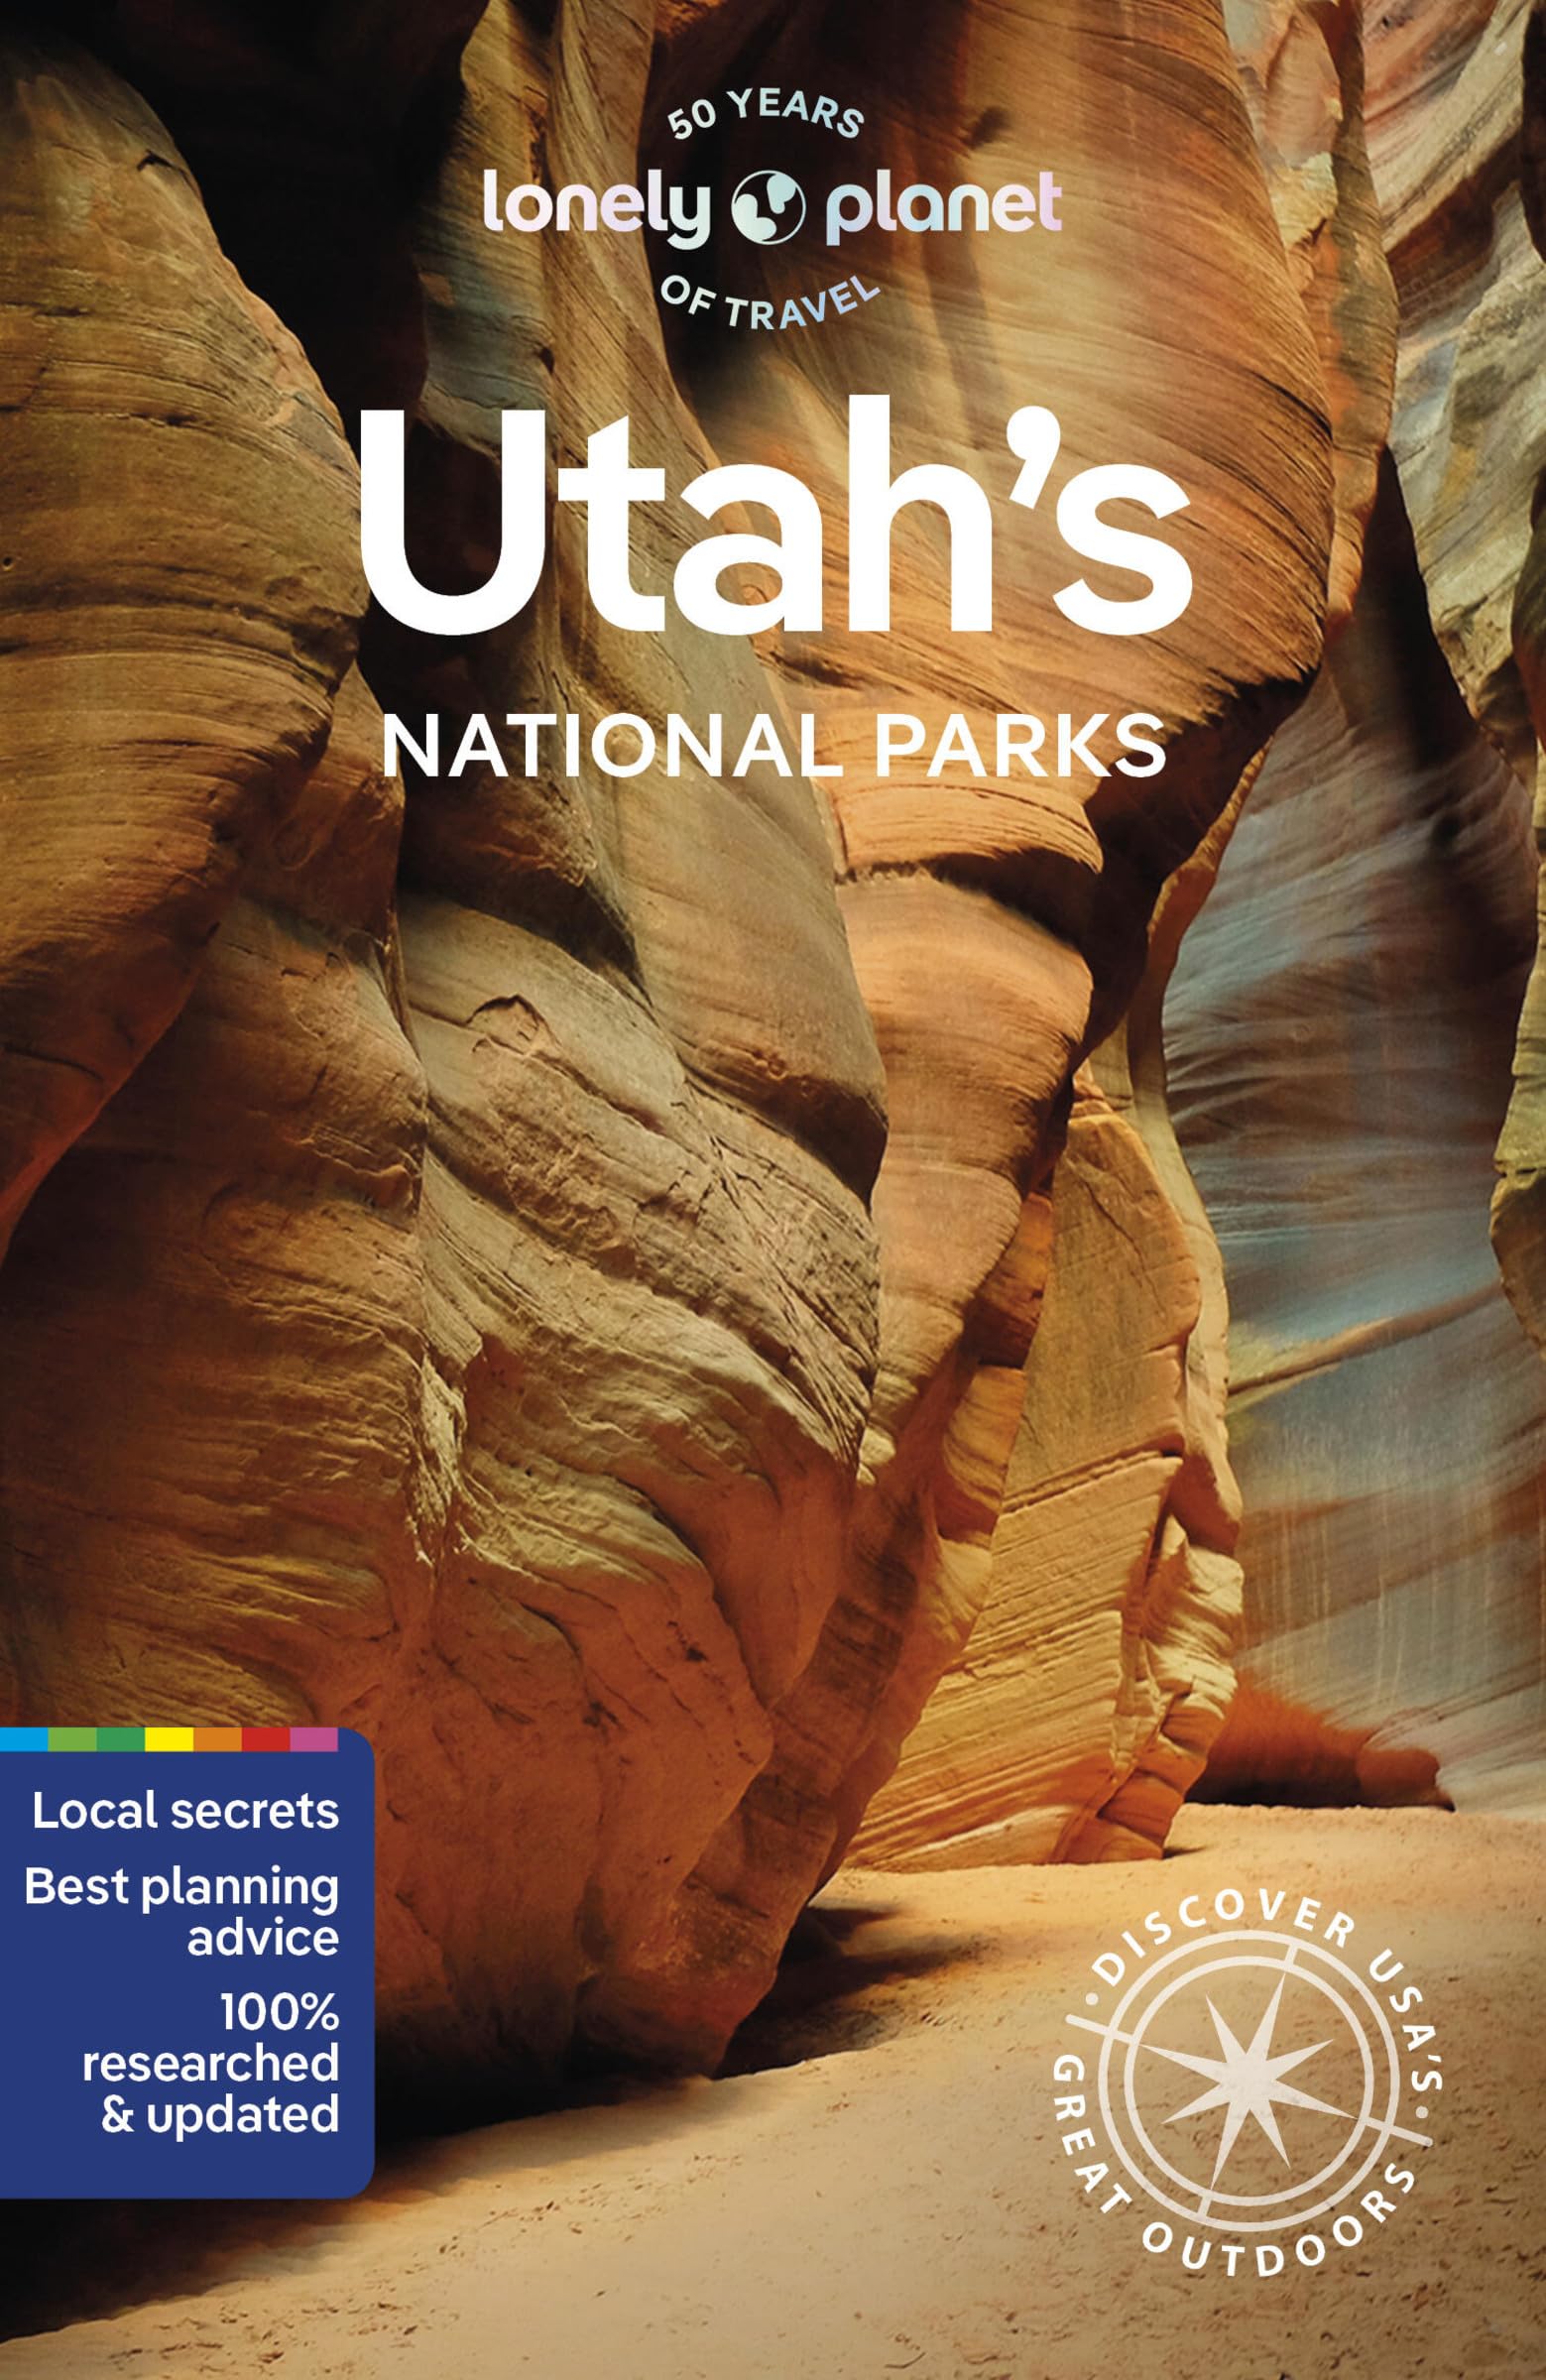 Lonely Planet Utah's National Parks 6: Zion, Bryce Canyon, Arches, Canyonlands & Capitol Reef (National Parks Guide)